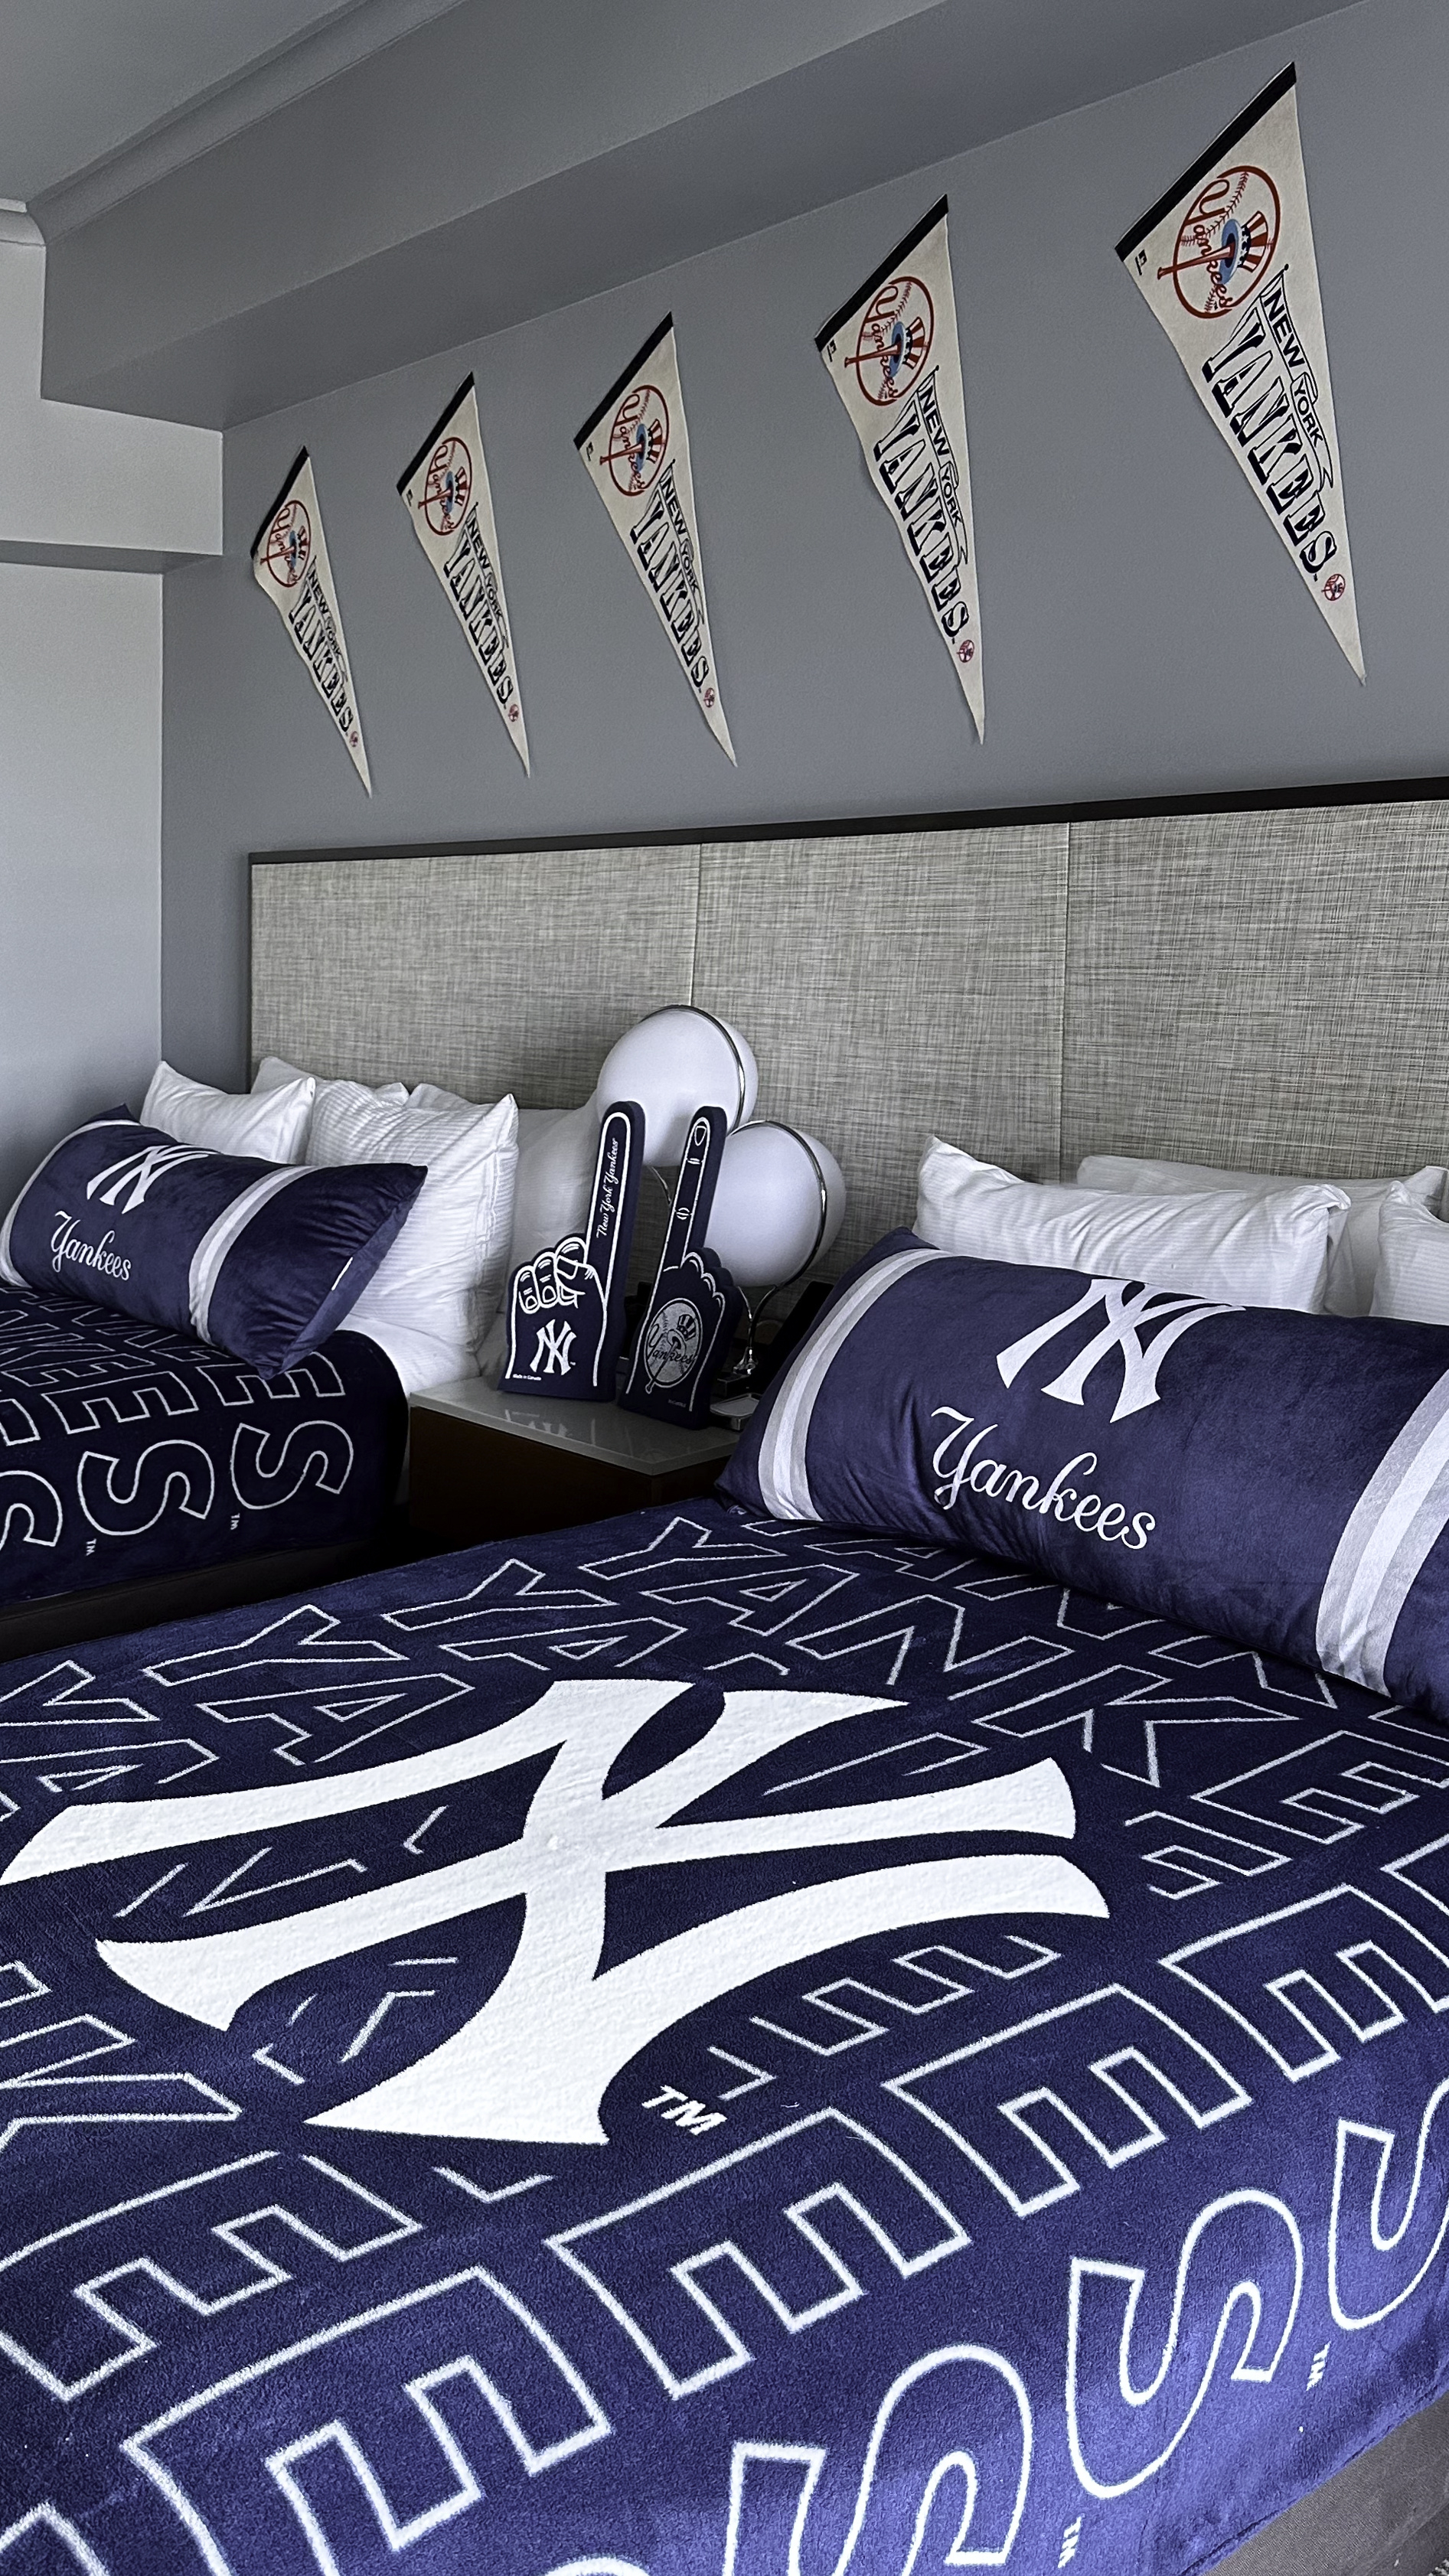 New York Hilton Midtown Hits a Home Run with the Grand Slam Suite,  Celebrating the Legendary New York Yankees